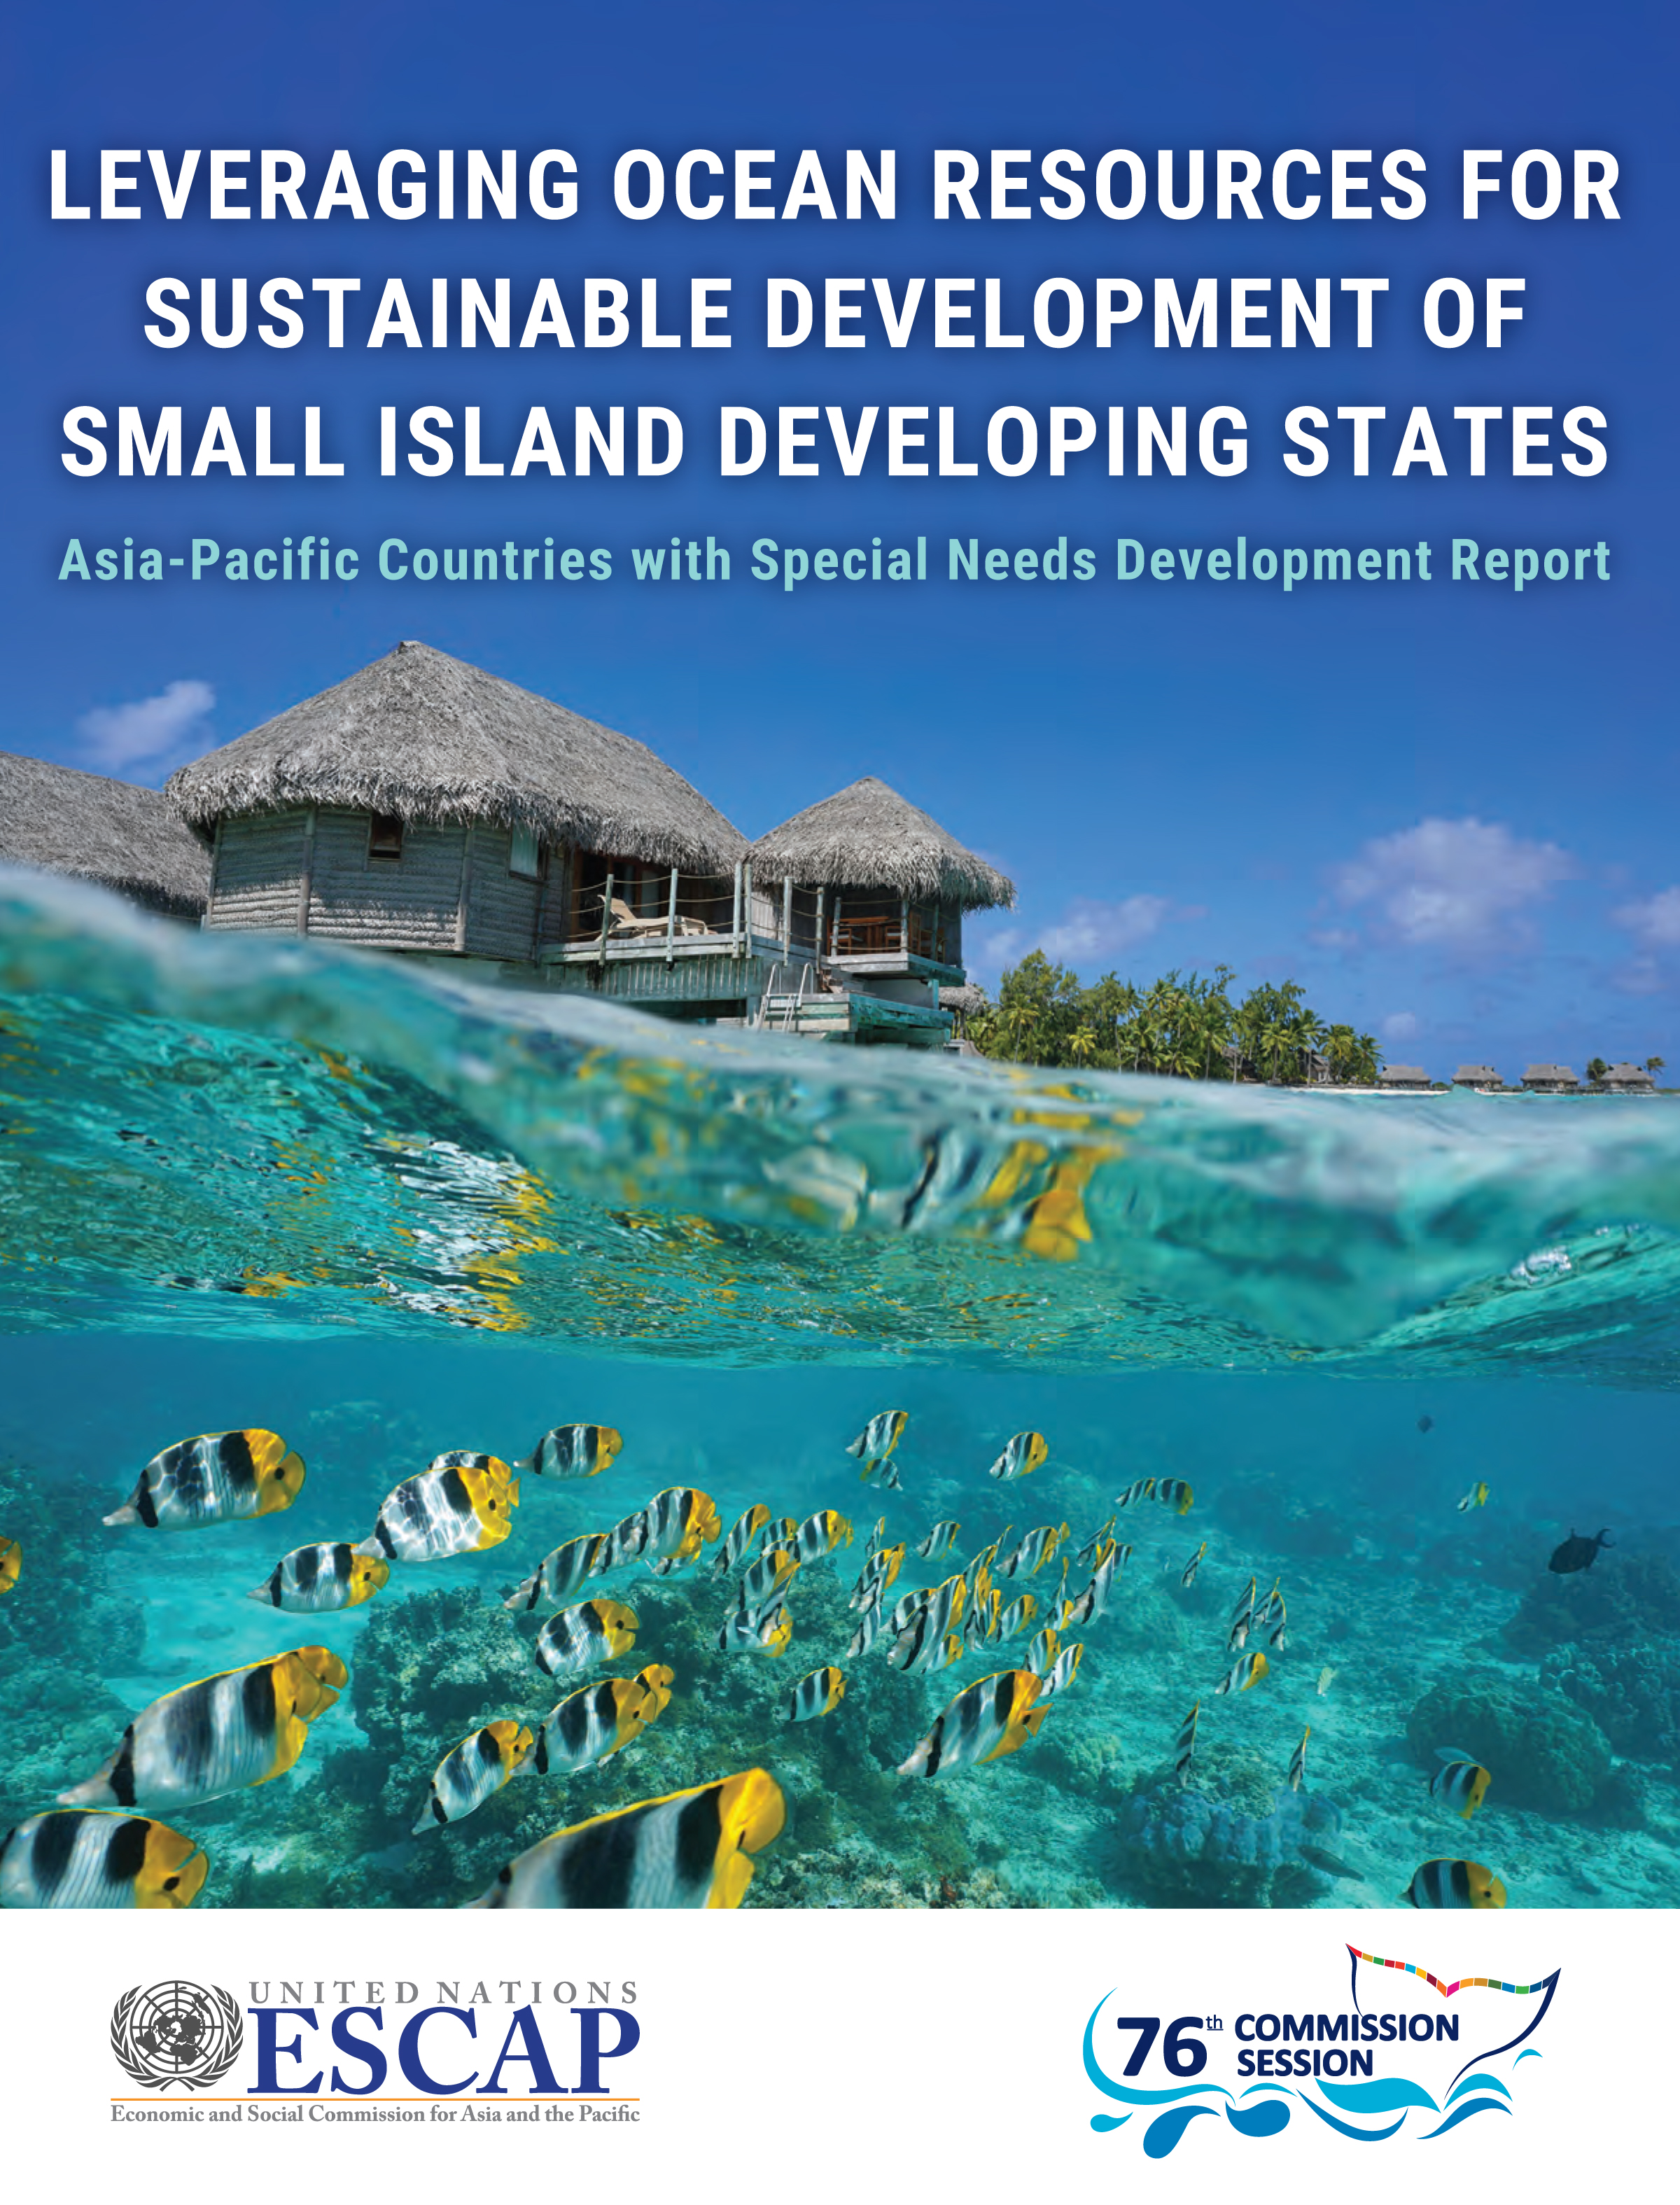 image of Tourism as a driver of sustainable development in Asia-Pacific small island developing States